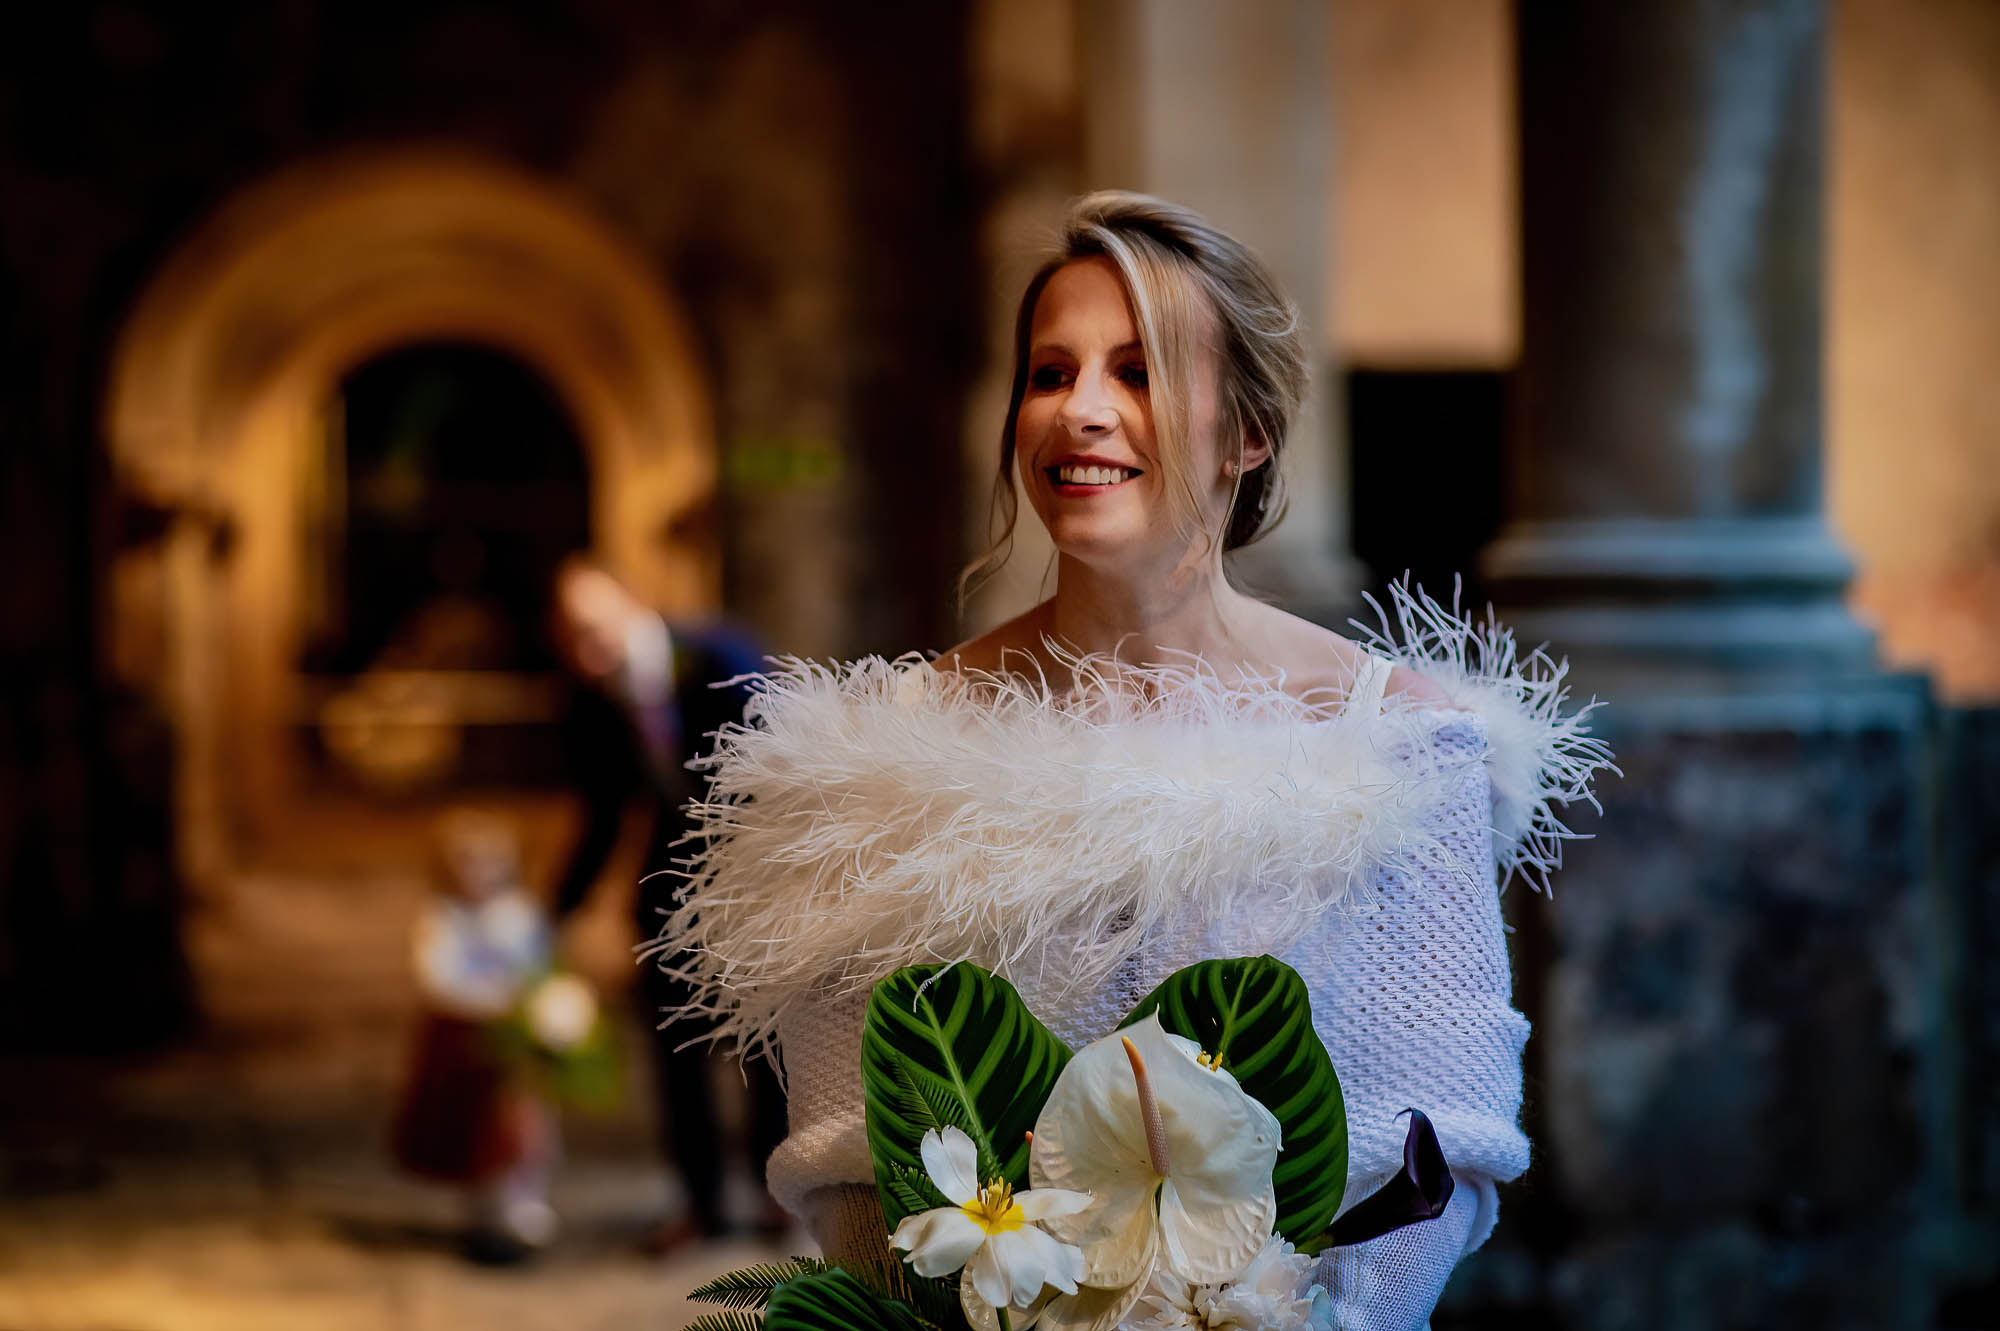 Sunrise wedding photography from the Roman baths in Bath, with Andy and Olivia captured by Damien Vickers Photography